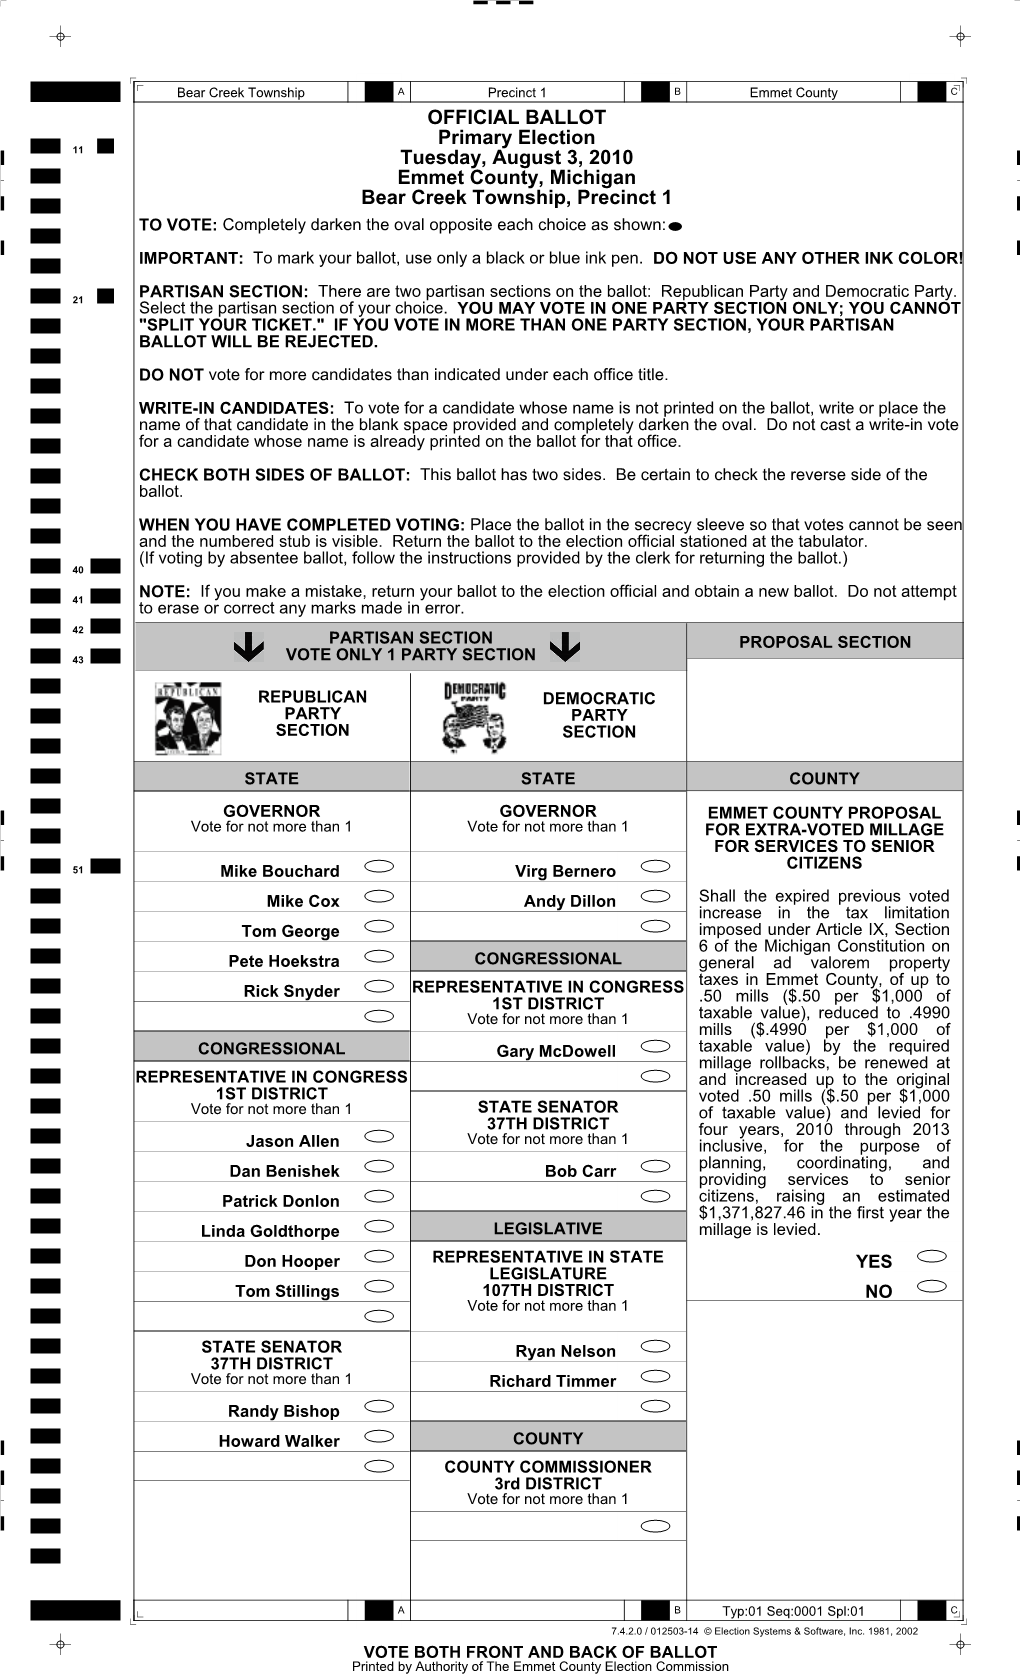 OFFICIAL BALLOT Primary Election Tuesday